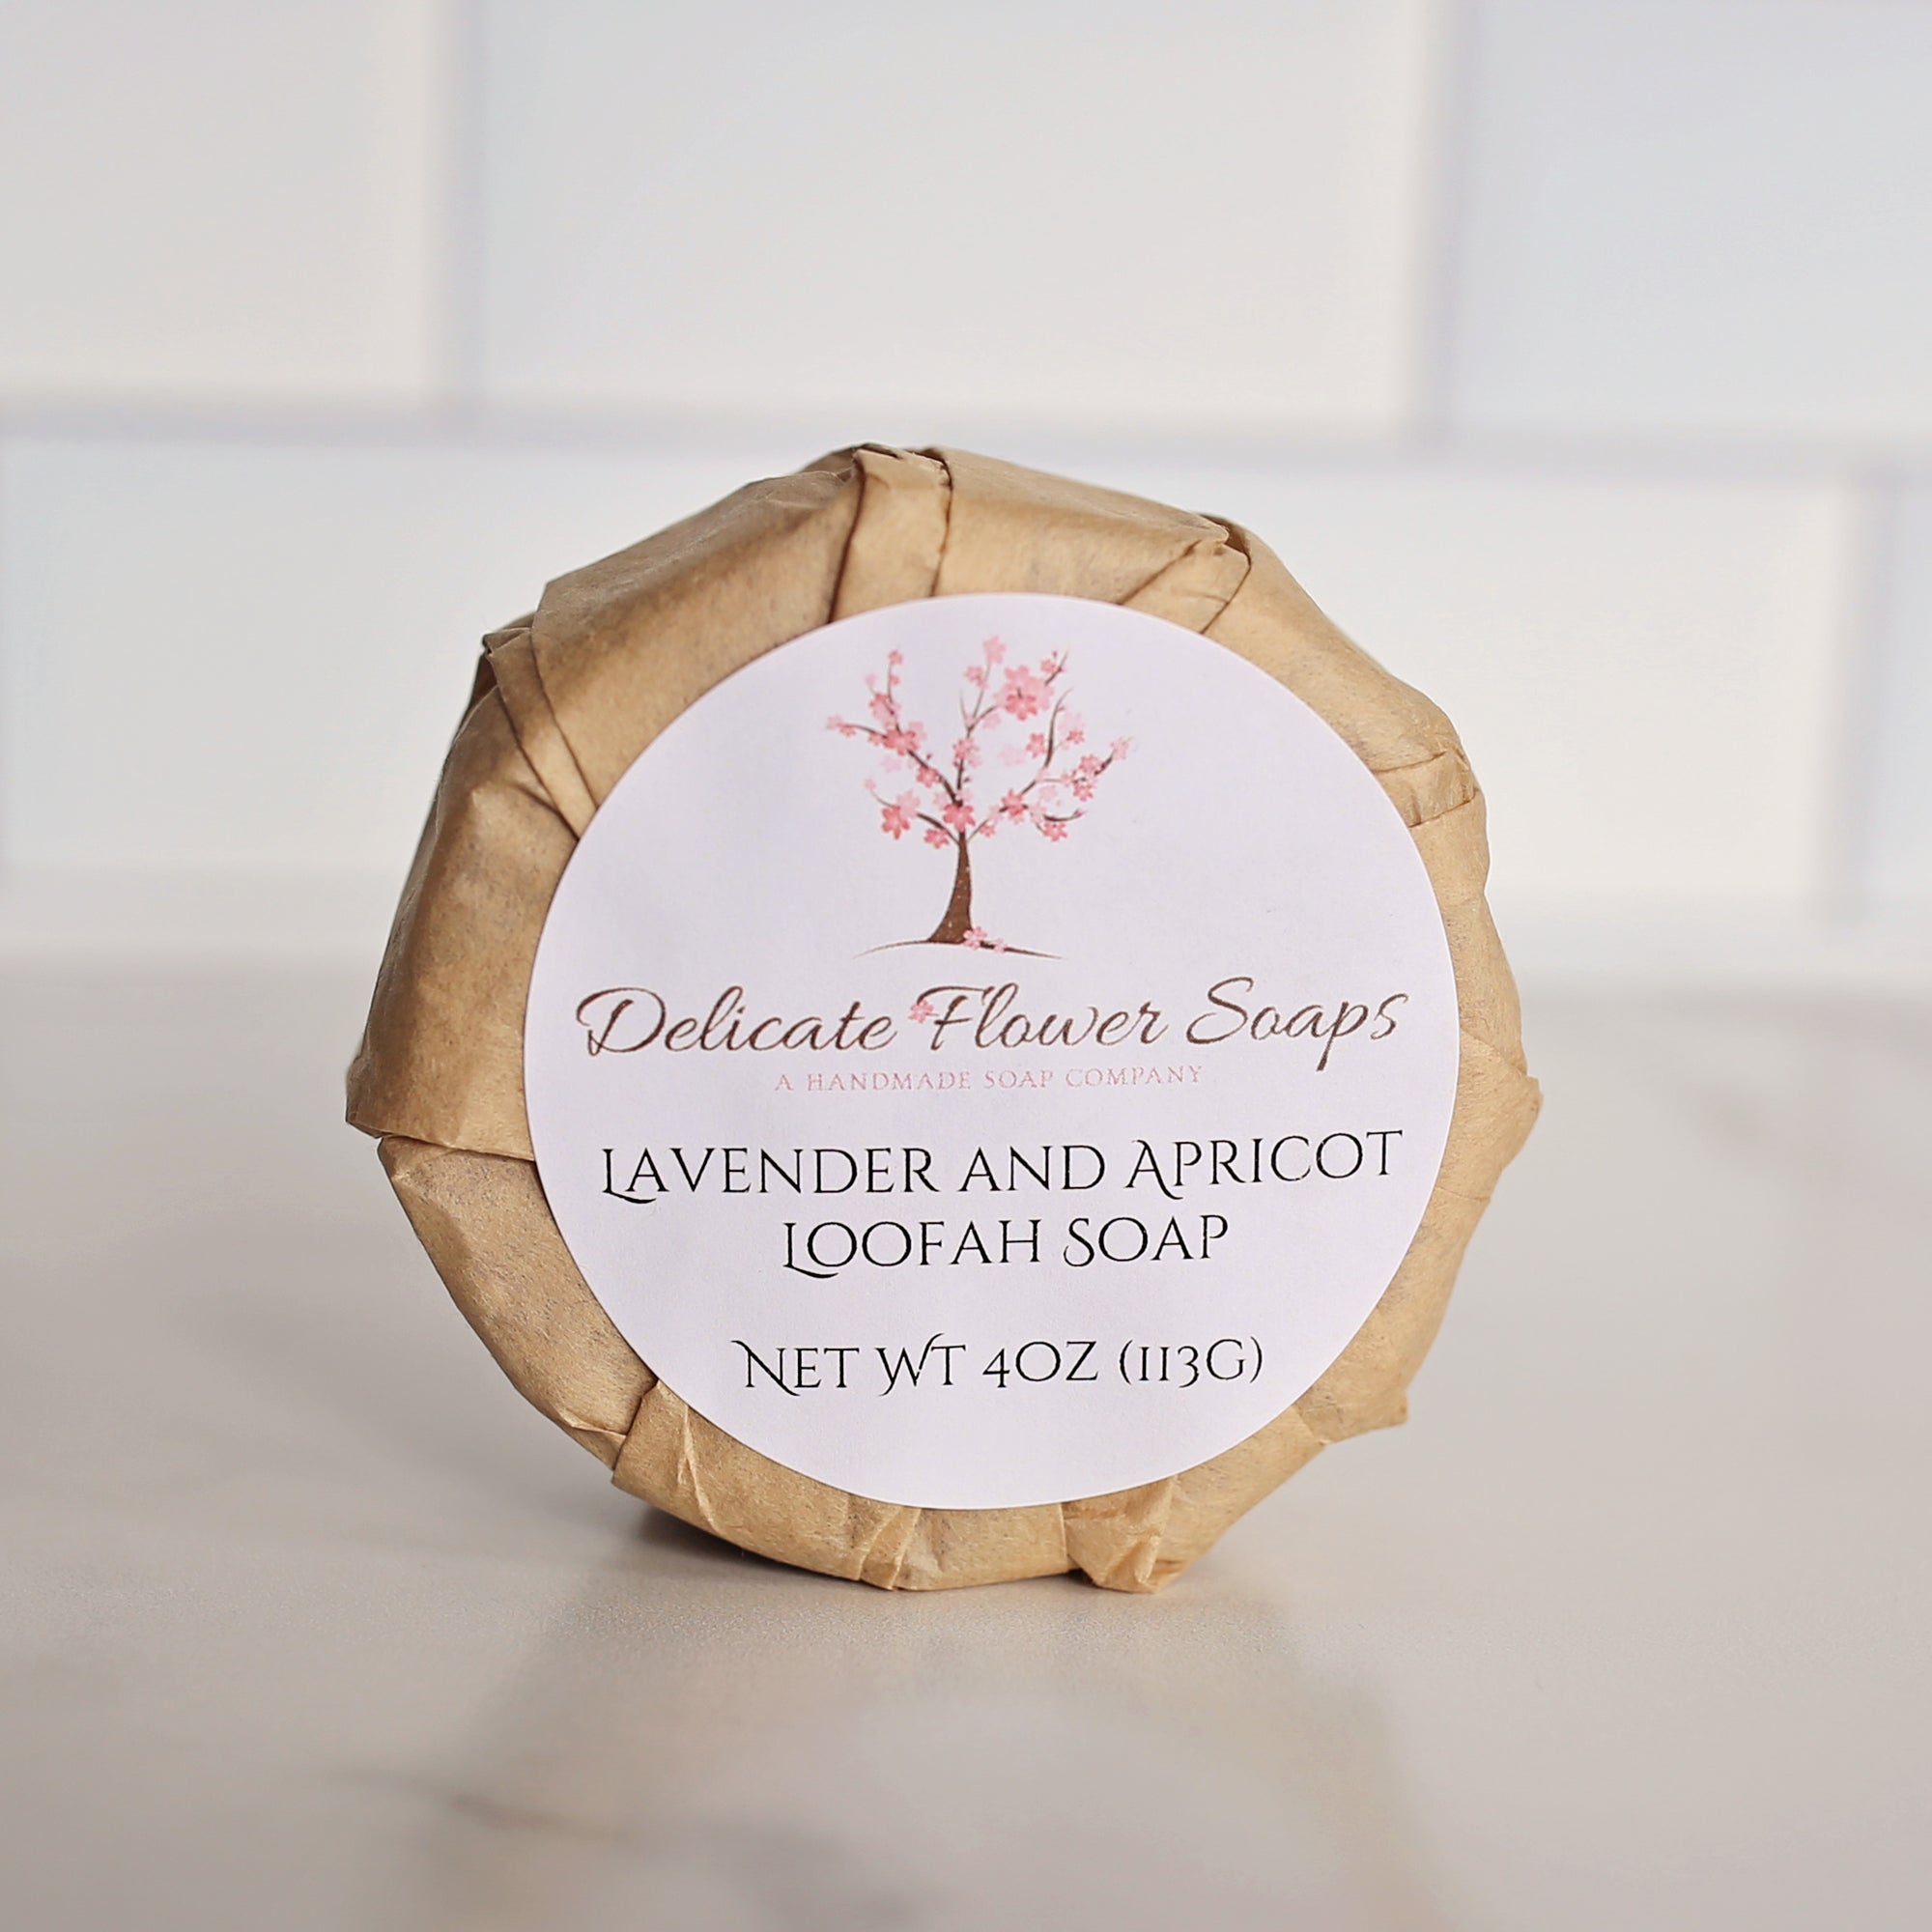 Lavender and Apricot Loofah Soap